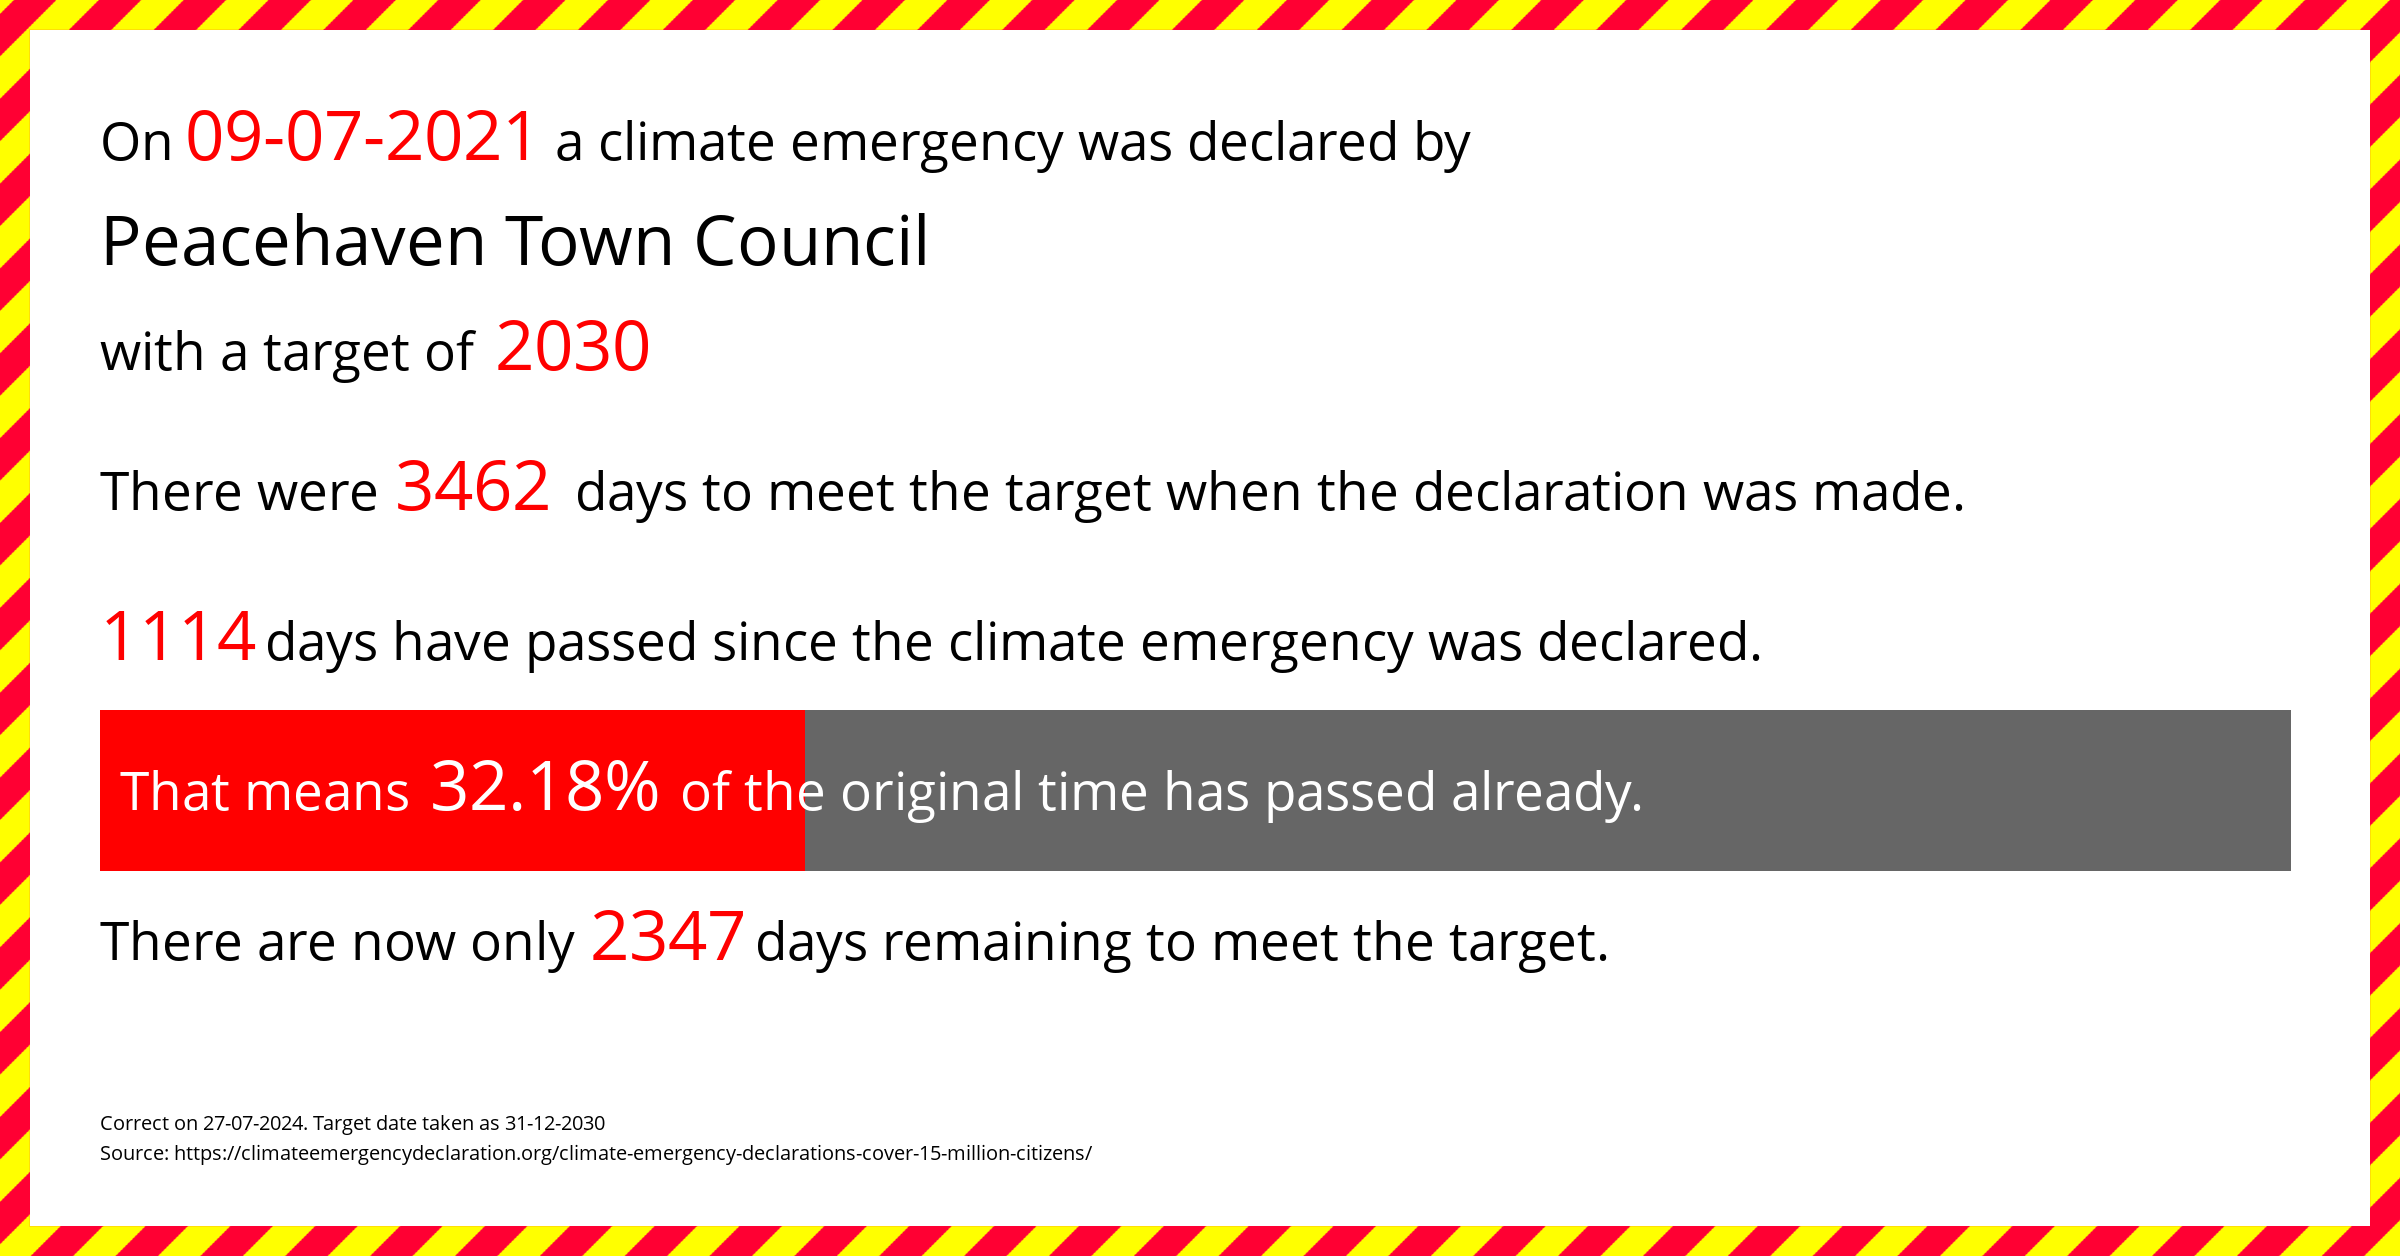 Peacehaven Town Council  declared a Climate emergency on Friday 9th July 2021, with a target of 2030.